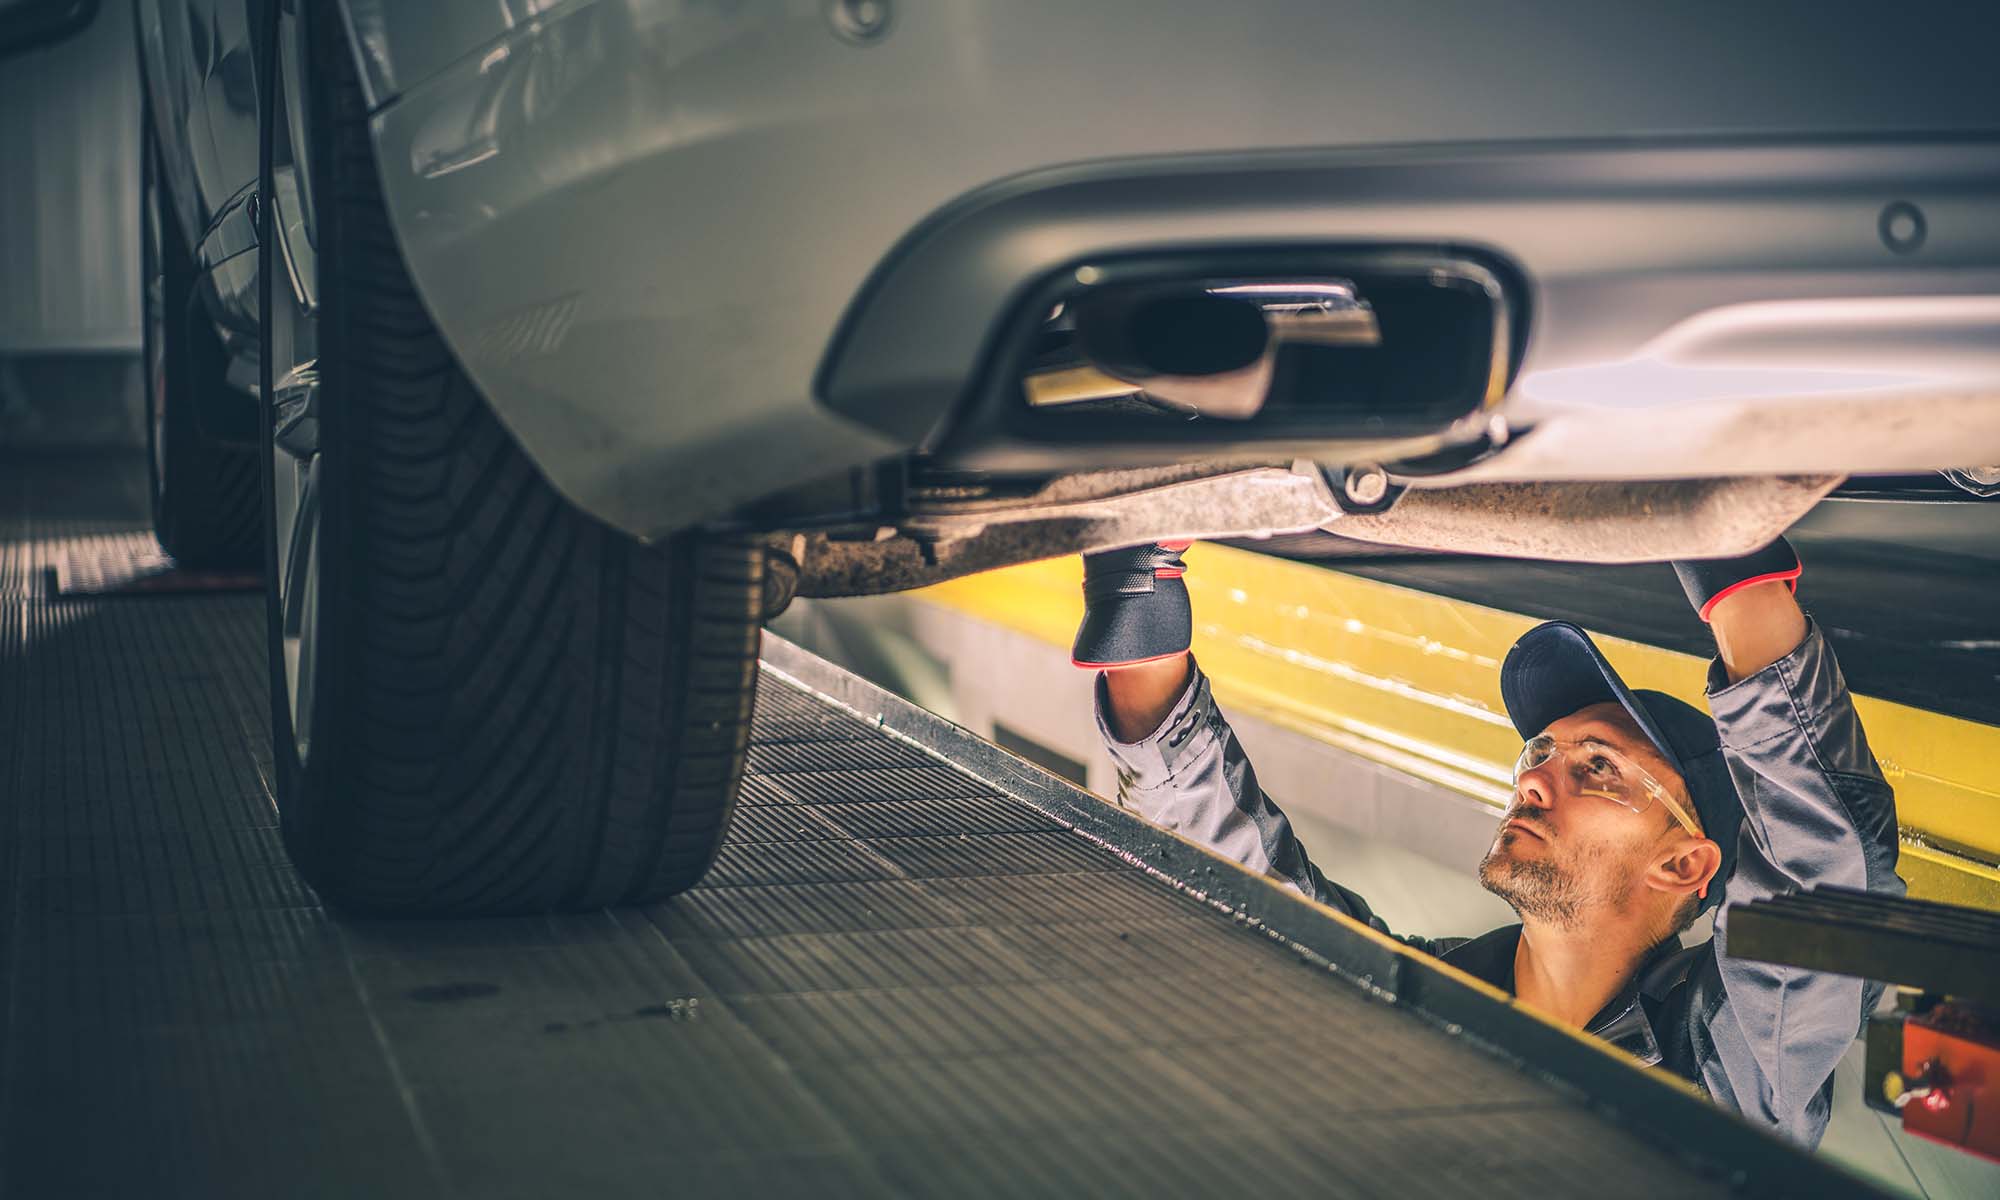 A mechanic checking the bottom of a vehicle that is propped up on a lift.